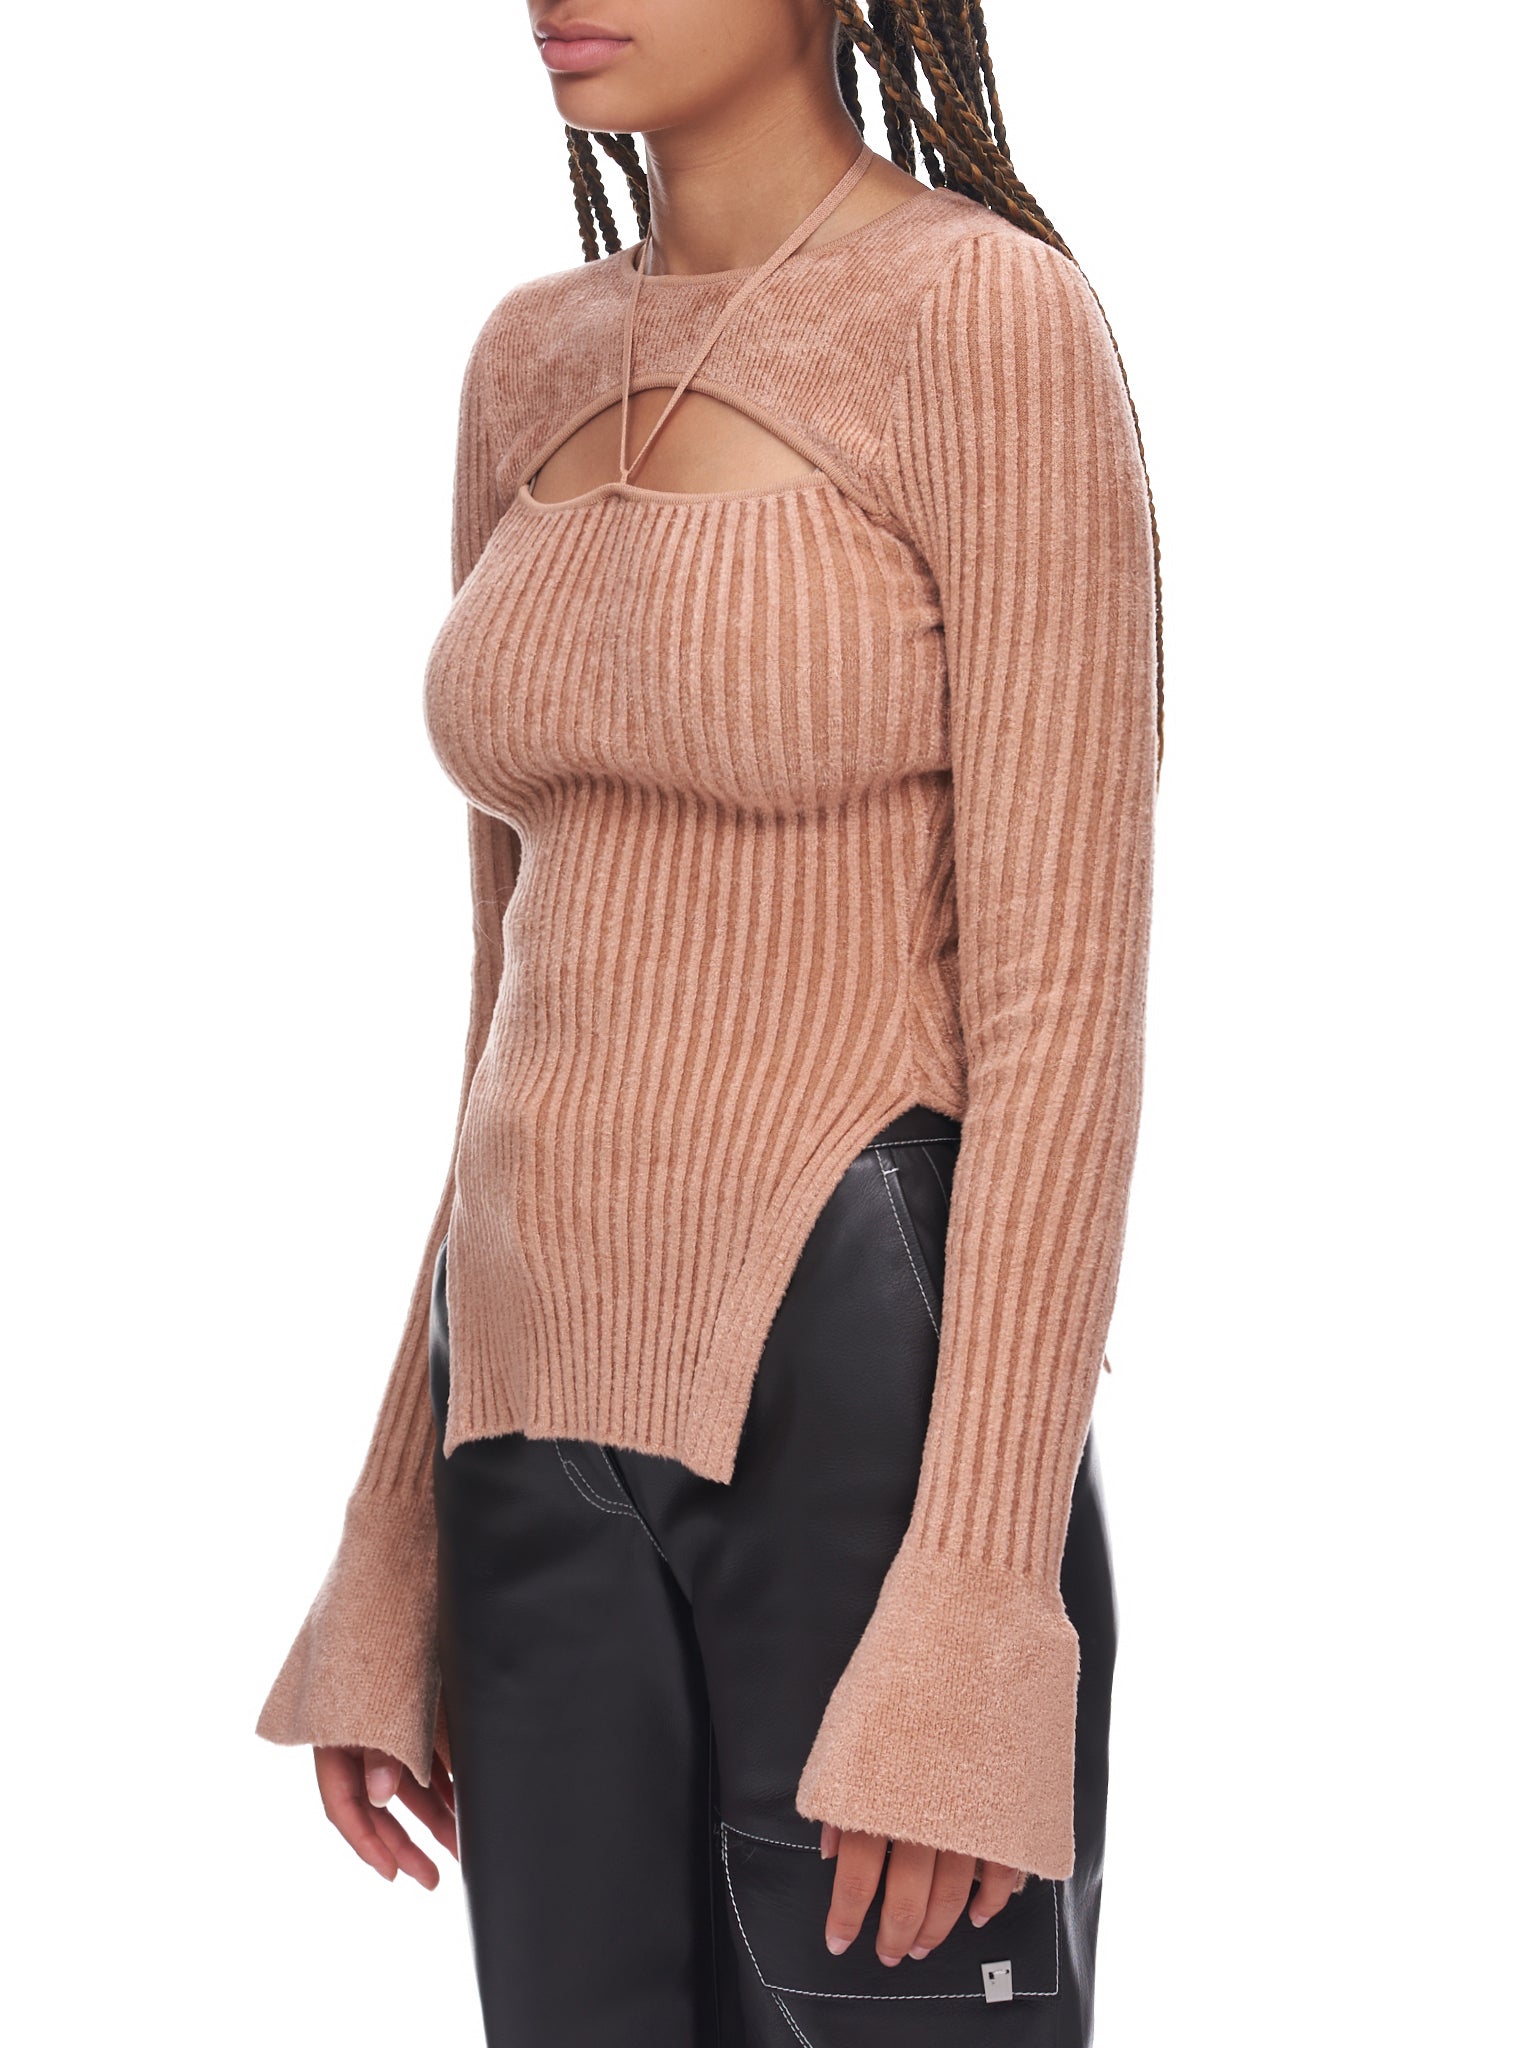 Knit Sweater (TO16774476-0476-002-NUDE)